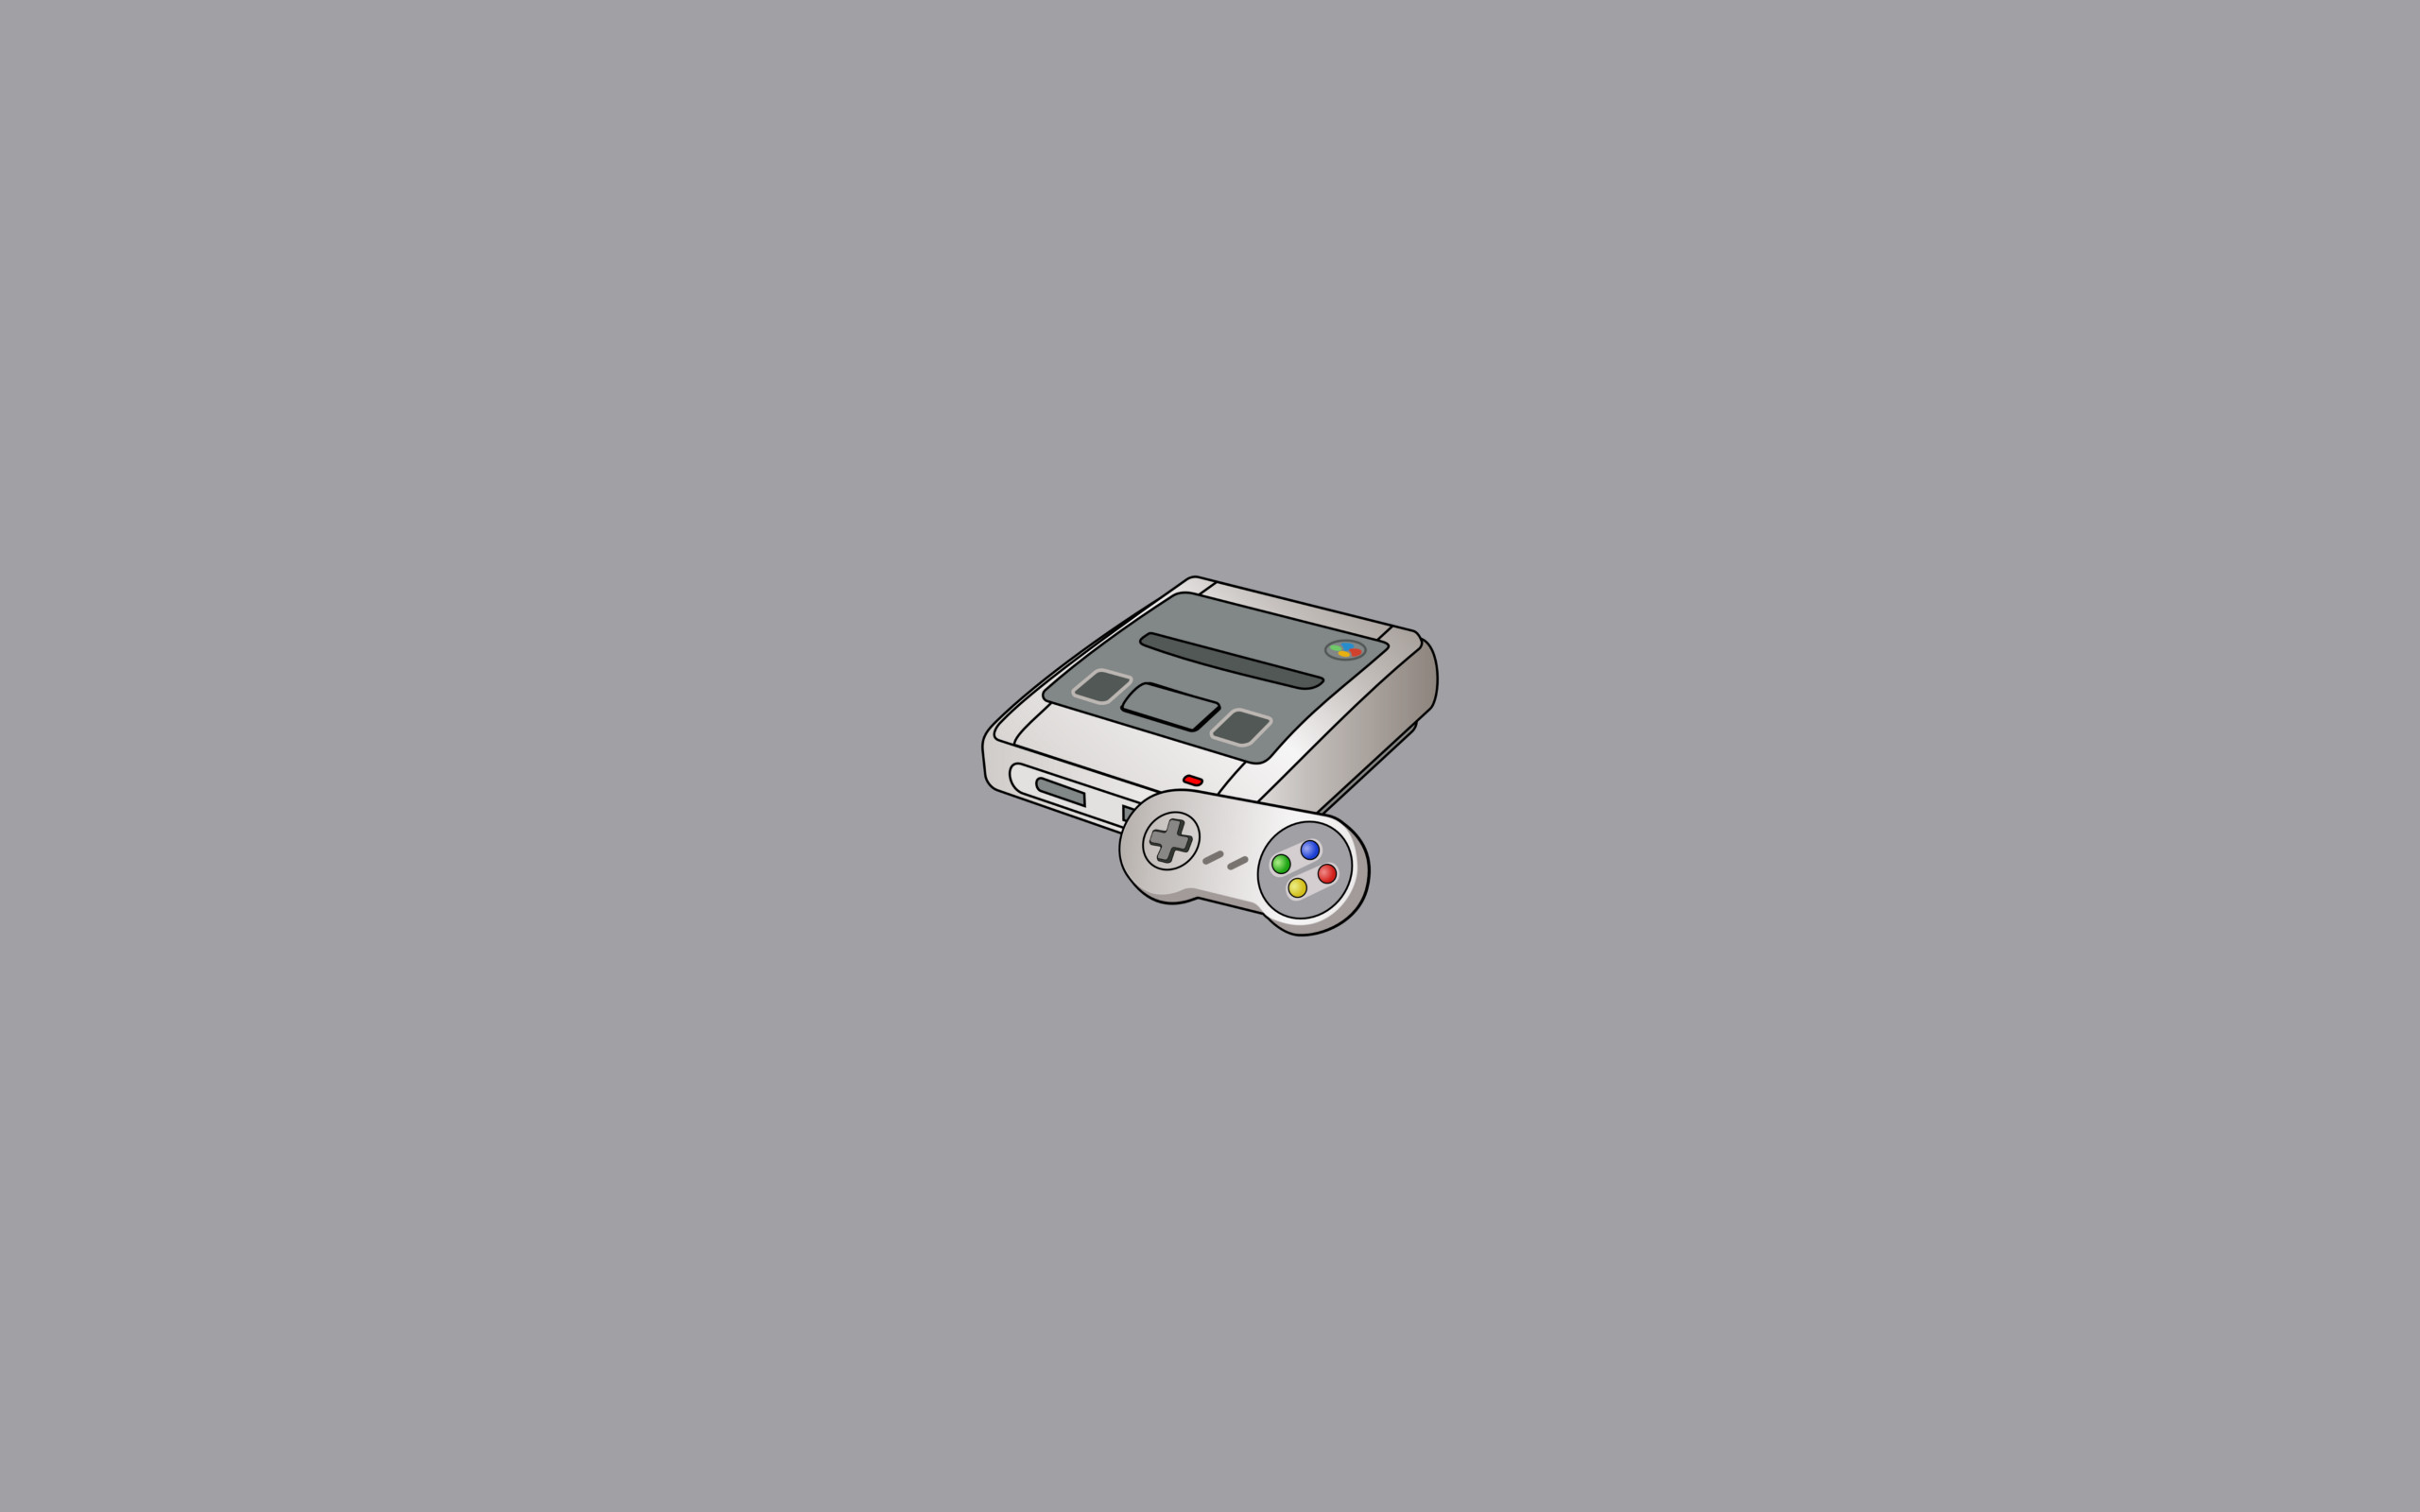 SNES Console Drawing – by Kroontje